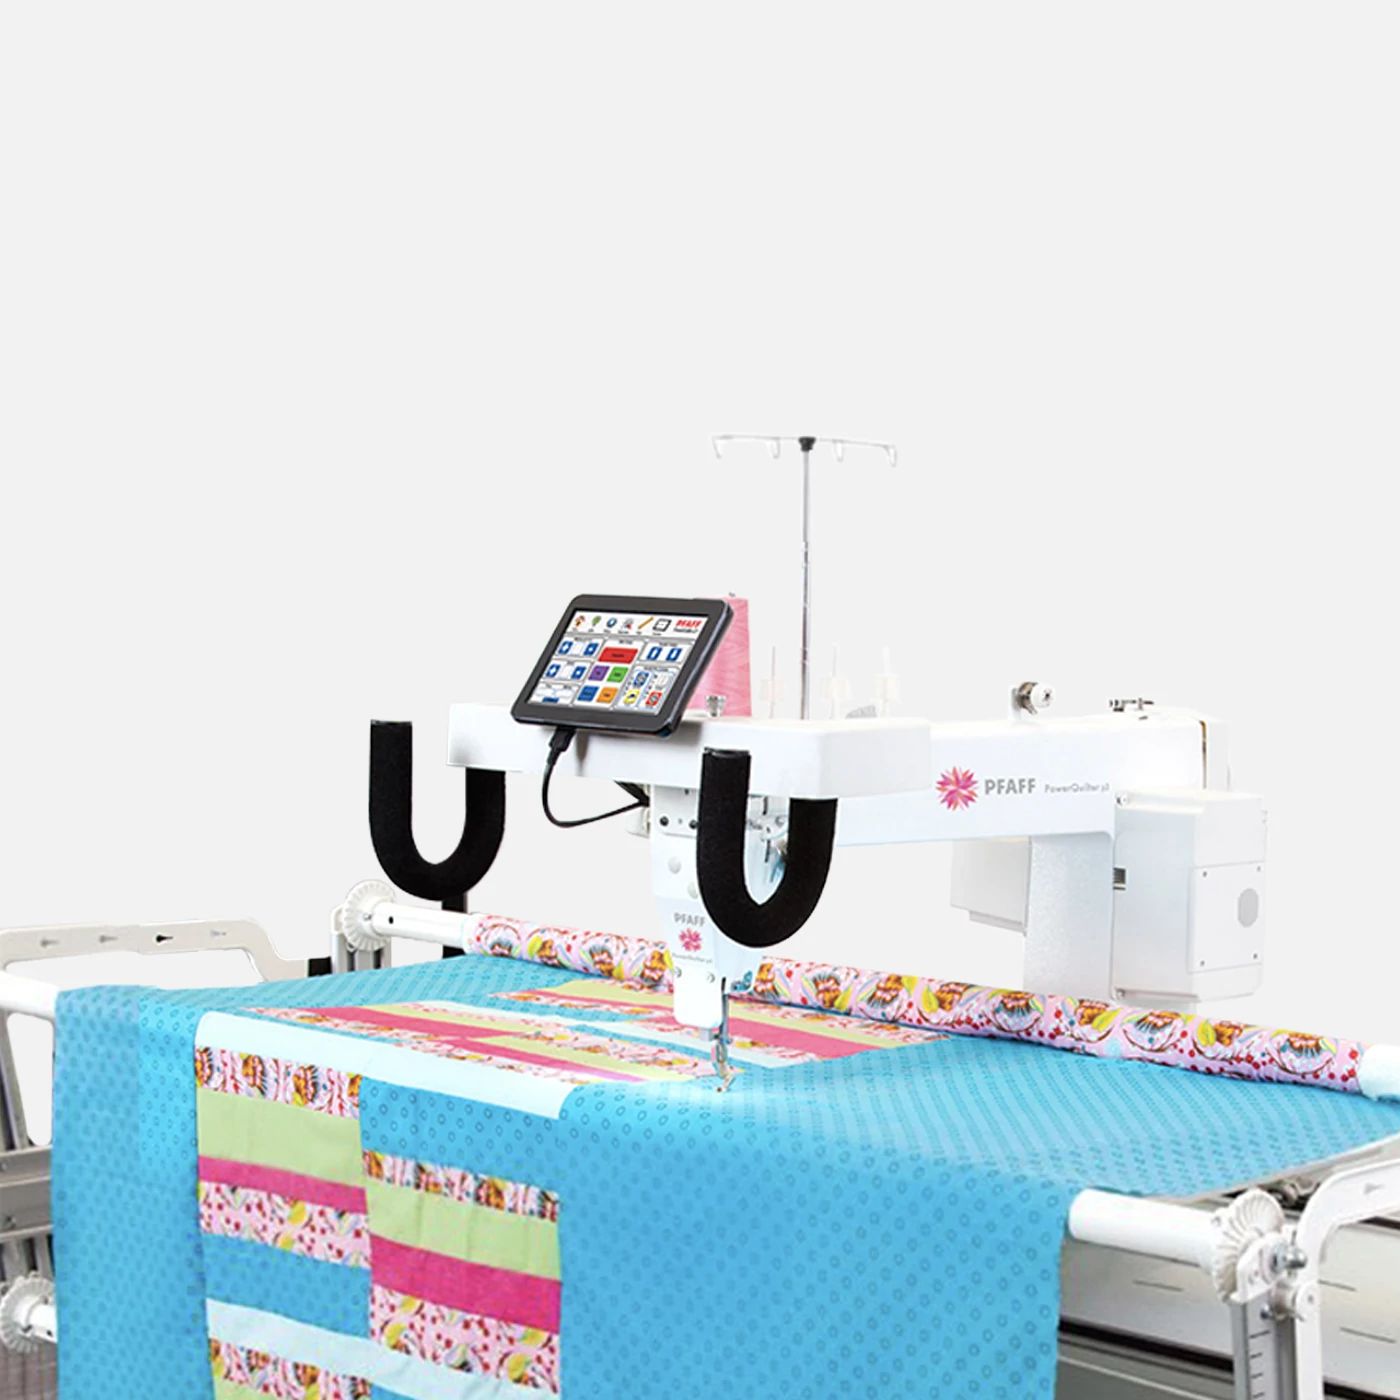 powerquilter™ p3 Long Arm Quilting Machine